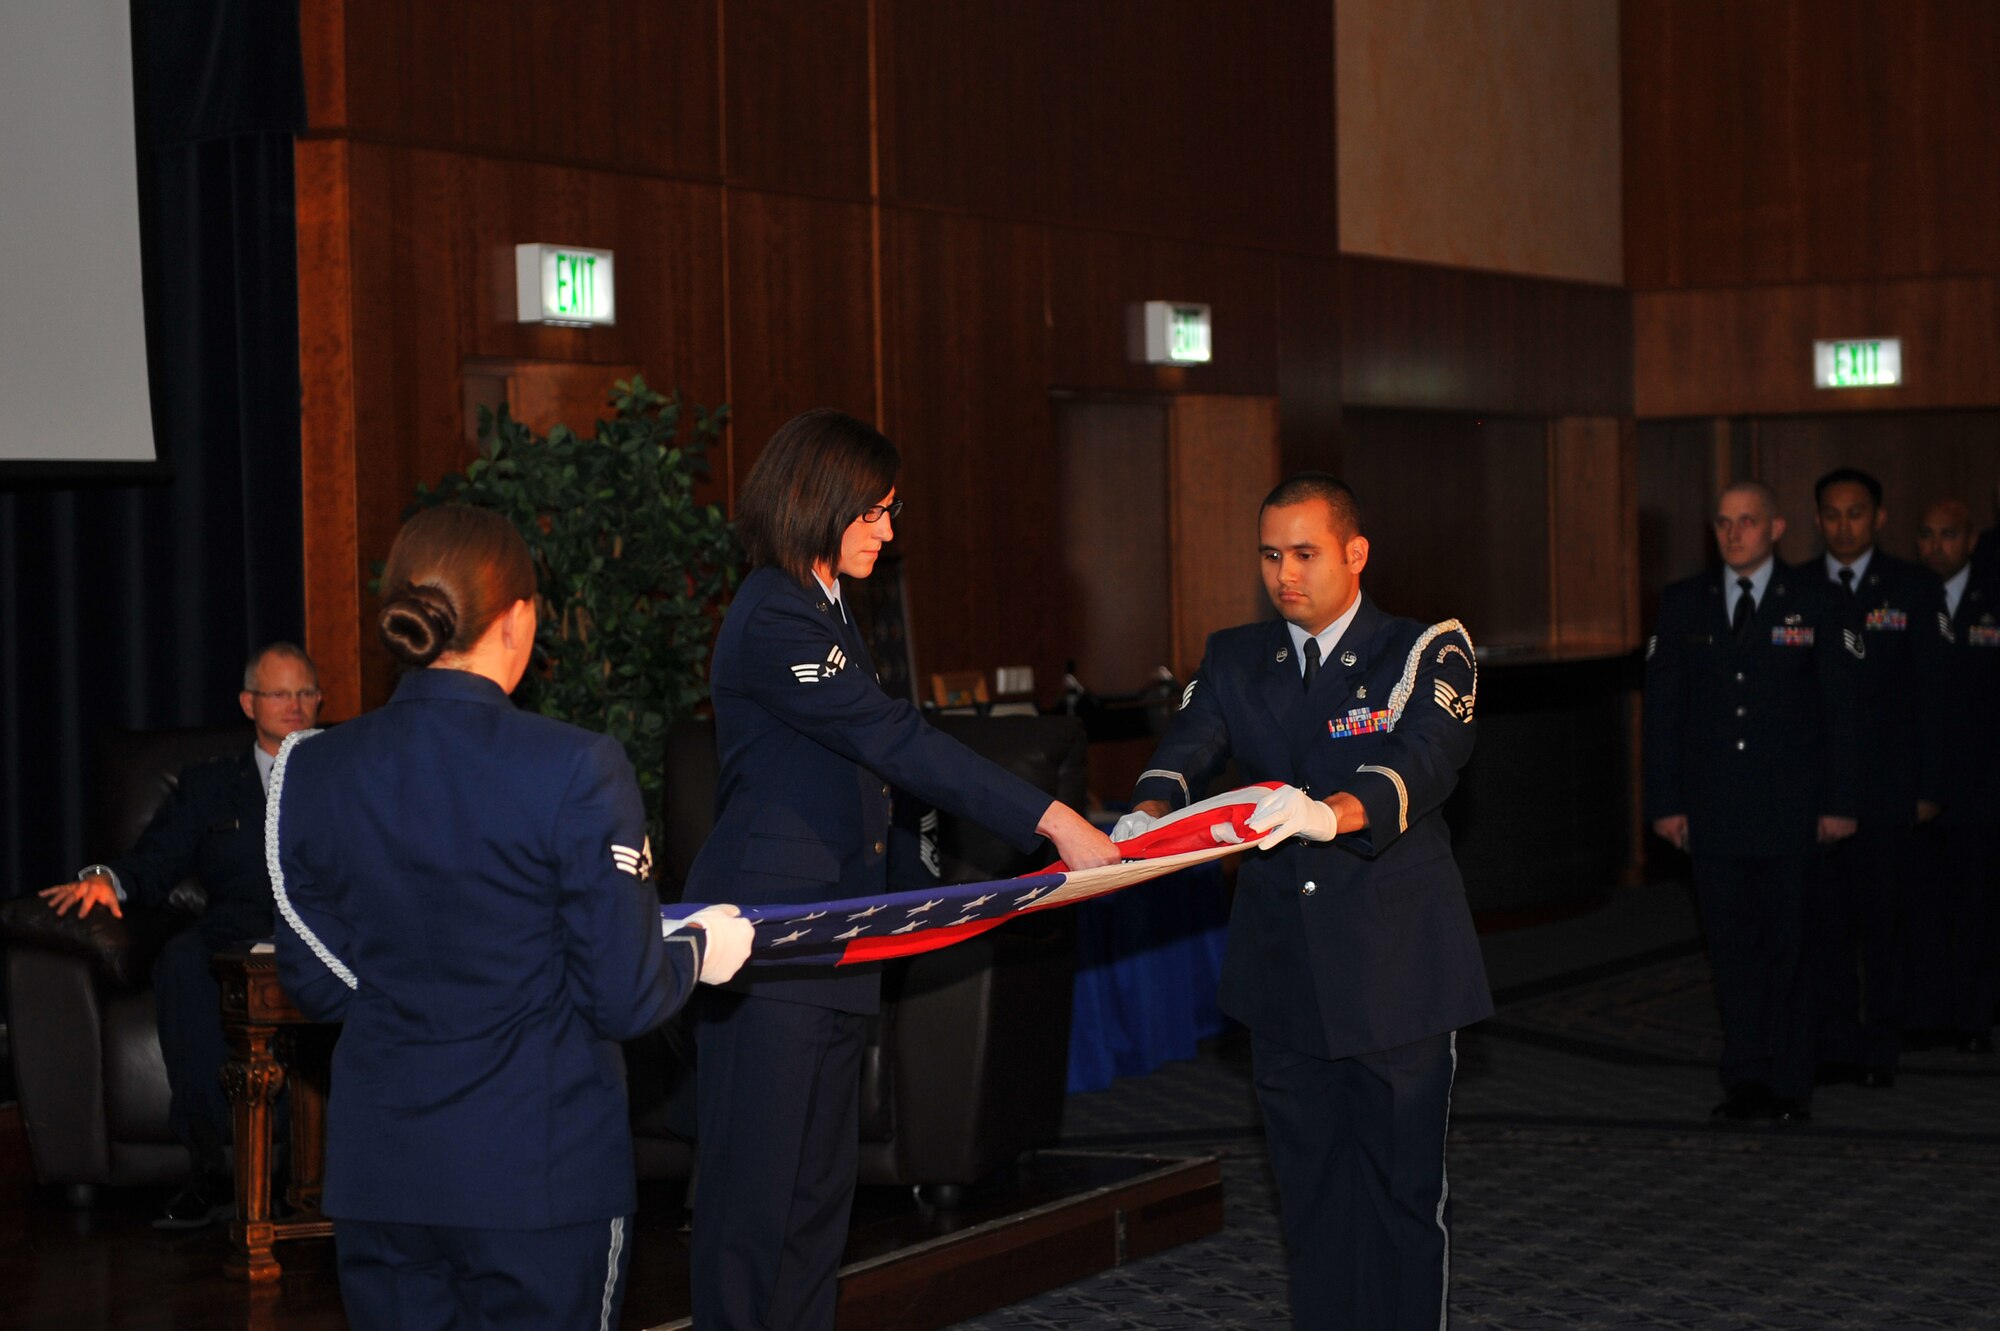 SPANGDAHLEM AIR BASE, Germany – Members of the 52nd Fighter Wing Honor Guard, along with Airmen from throughout the 52nd FW, perform a flag folding ceremony for Chief Master Sgt. Sandra Miller, 52nd FW command chief, during Miller’s retirement ceremony inside the Club Eifel ballroom here June 8. Miller retired after 29 years of service and more than 150 people attended the ceremony to celebrate her transition into civilian life. (U.S. Air Force photo by Airman 1st Class Dillon Davis/Released)